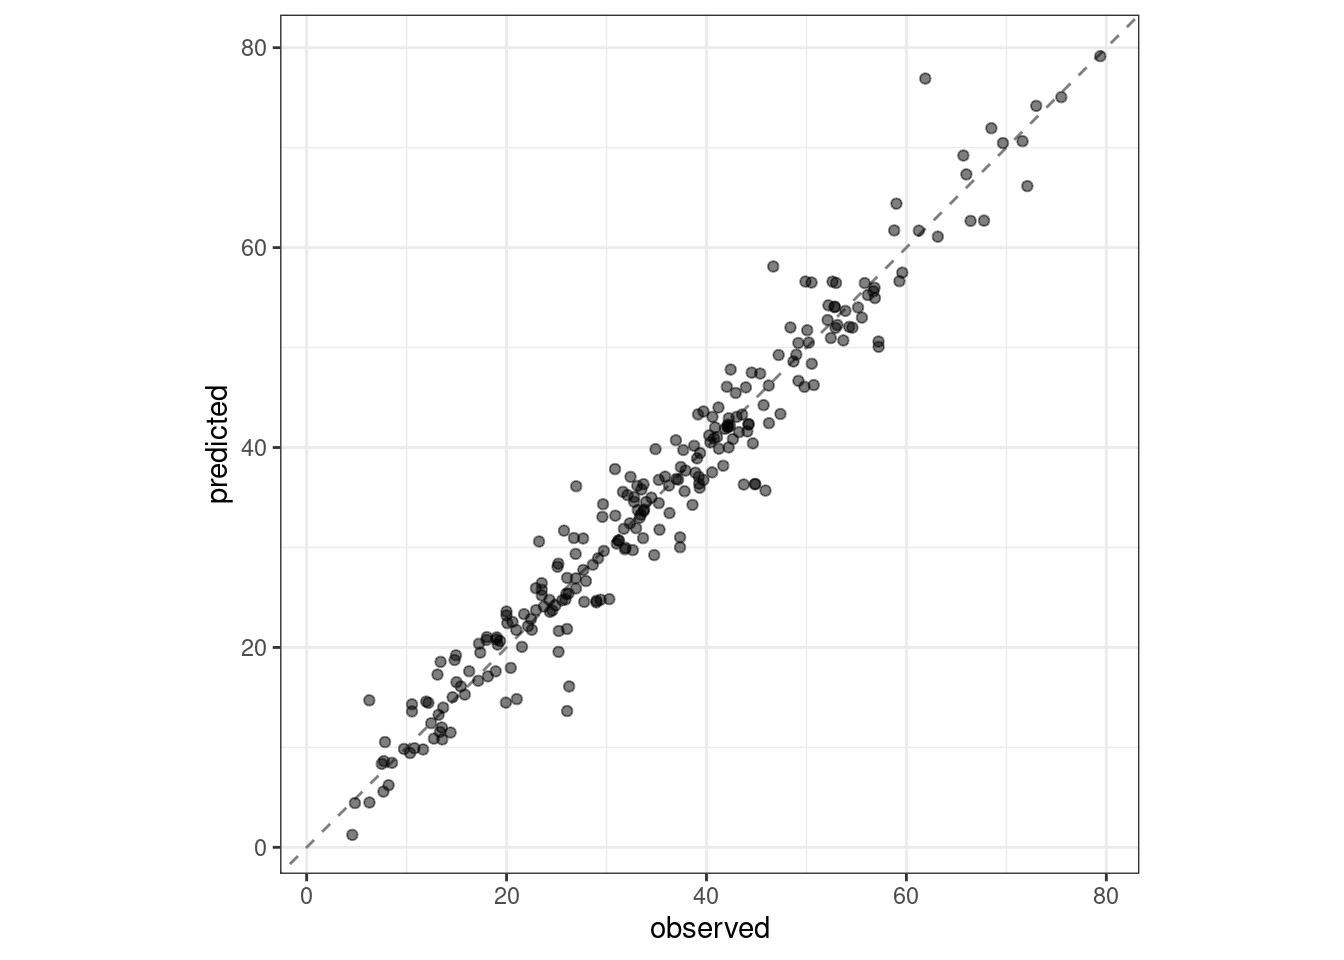 Observed versus predicted values for the test set. The values fall closely along the 45 degree line of identity.